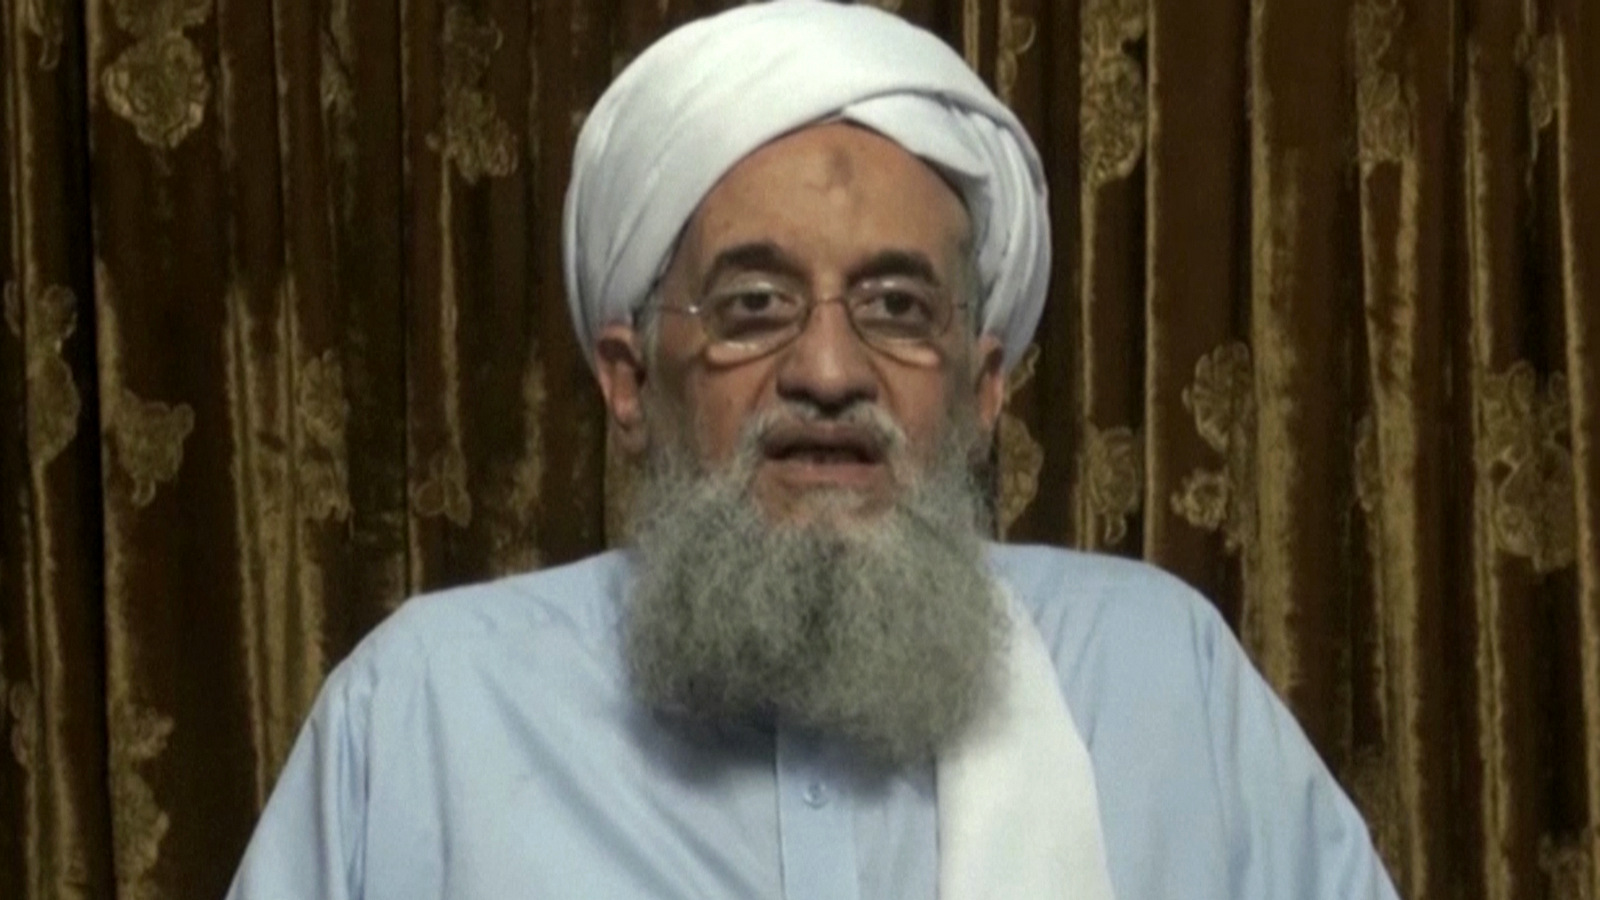 Ayman al-Zawahri, head of al-Qaida, delivers a statement in a video which was seen online by the SITE monitoring group. 